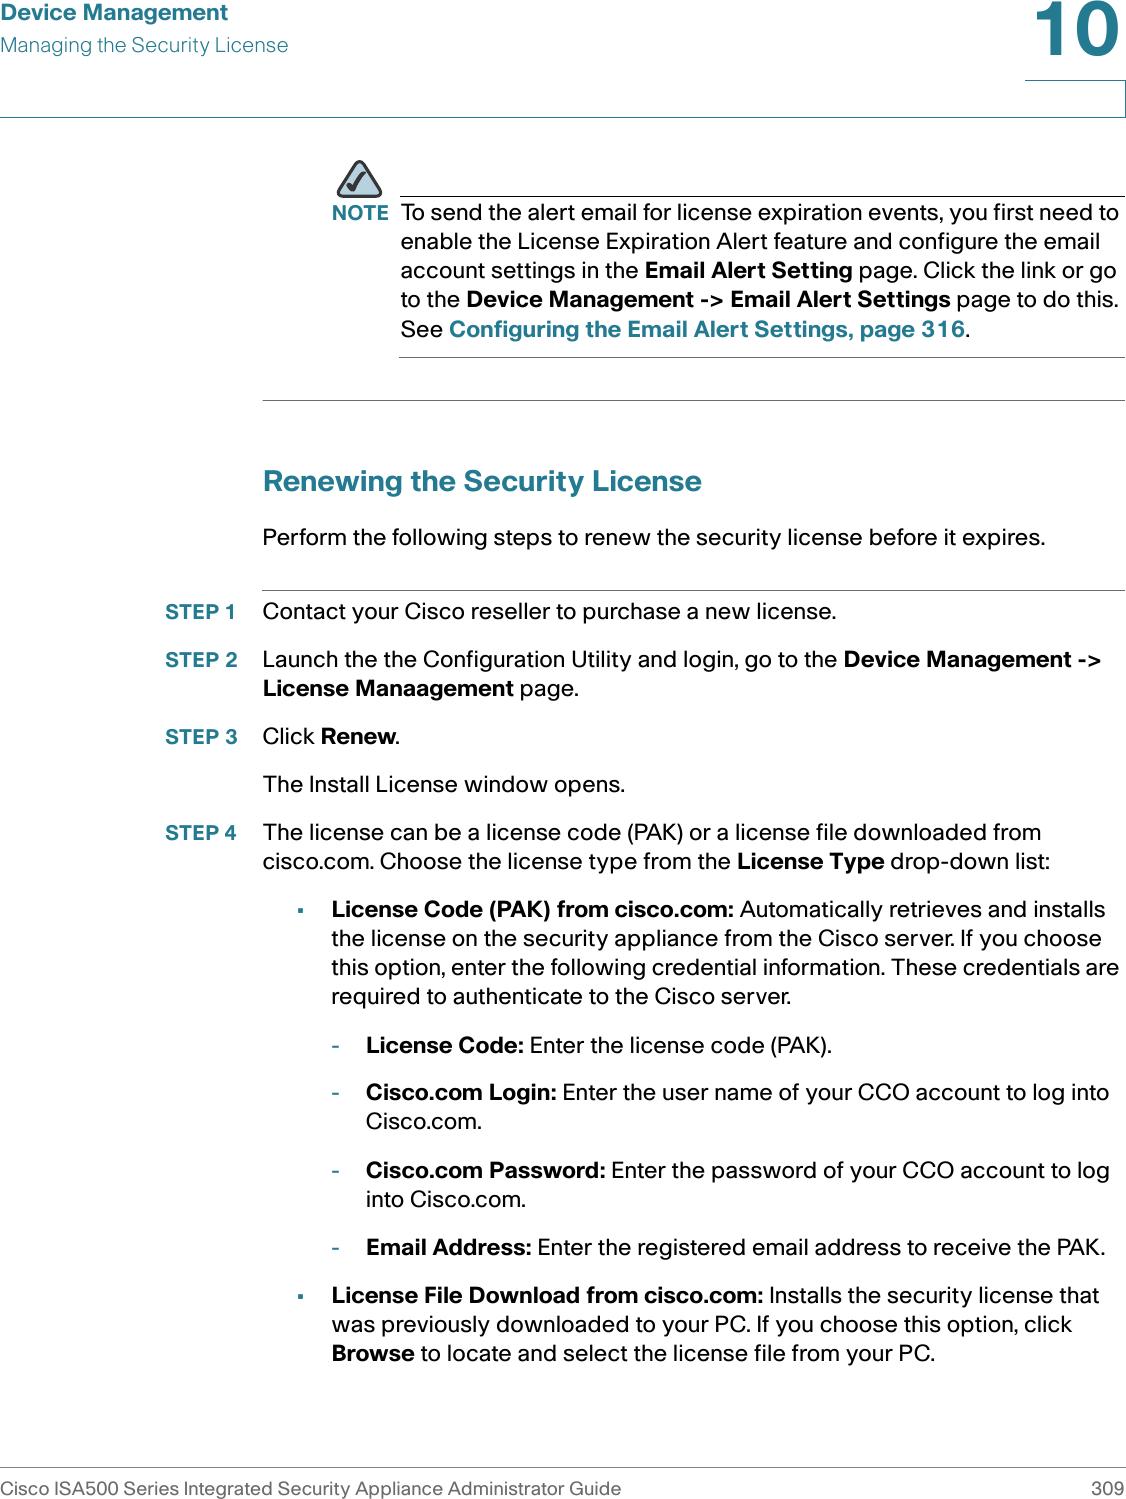 Device ManagementManaging the Security LicenseCisco ISA500 Series Integrated Security Appliance Administrator Guide 30910 NOTE To send the alert email for license expiration events, you first need to enable the License Expiration Alert feature and configure the email account settings in the Email Alert Setting page. Click the link or go to the Device Management -&gt; Email Alert Settings page to do this. See Configuring the Email Alert Settings, page 316.Renewing the Security LicensePerform the following steps to renew the security license before it expires. STEP 1 Contact your Cisco reseller to purchase a new license. STEP 2 Launch the the Configuration Utility and login, go to the Device Management -&gt; License Manaagement page. STEP 3 Click Renew. The Install License window opens. STEP 4 The license can be a license code (PAK) or a license file downloaded from cisco.com. Choose the license type from the License Type drop-down list: •License Code (PAK) from cisco.com: Automatically retrieves and installs the license on the security appliance from the Cisco server. If you choose this option, enter the following credential information. These credentials are required to authenticate to the Cisco server. -License Code: Enter the license code (PAK).-Cisco.com Login: Enter the user name of your CCO account to log into Cisco.com.-Cisco.com Password: Enter the password of your CCO account to log into Cisco.com.-Email Address: Enter the registered email address to receive the PAK. •License File Download from cisco.com: Installs the security license that was previously downloaded to your PC. If you choose this option, click Browse to locate and select the license file from your PC. 